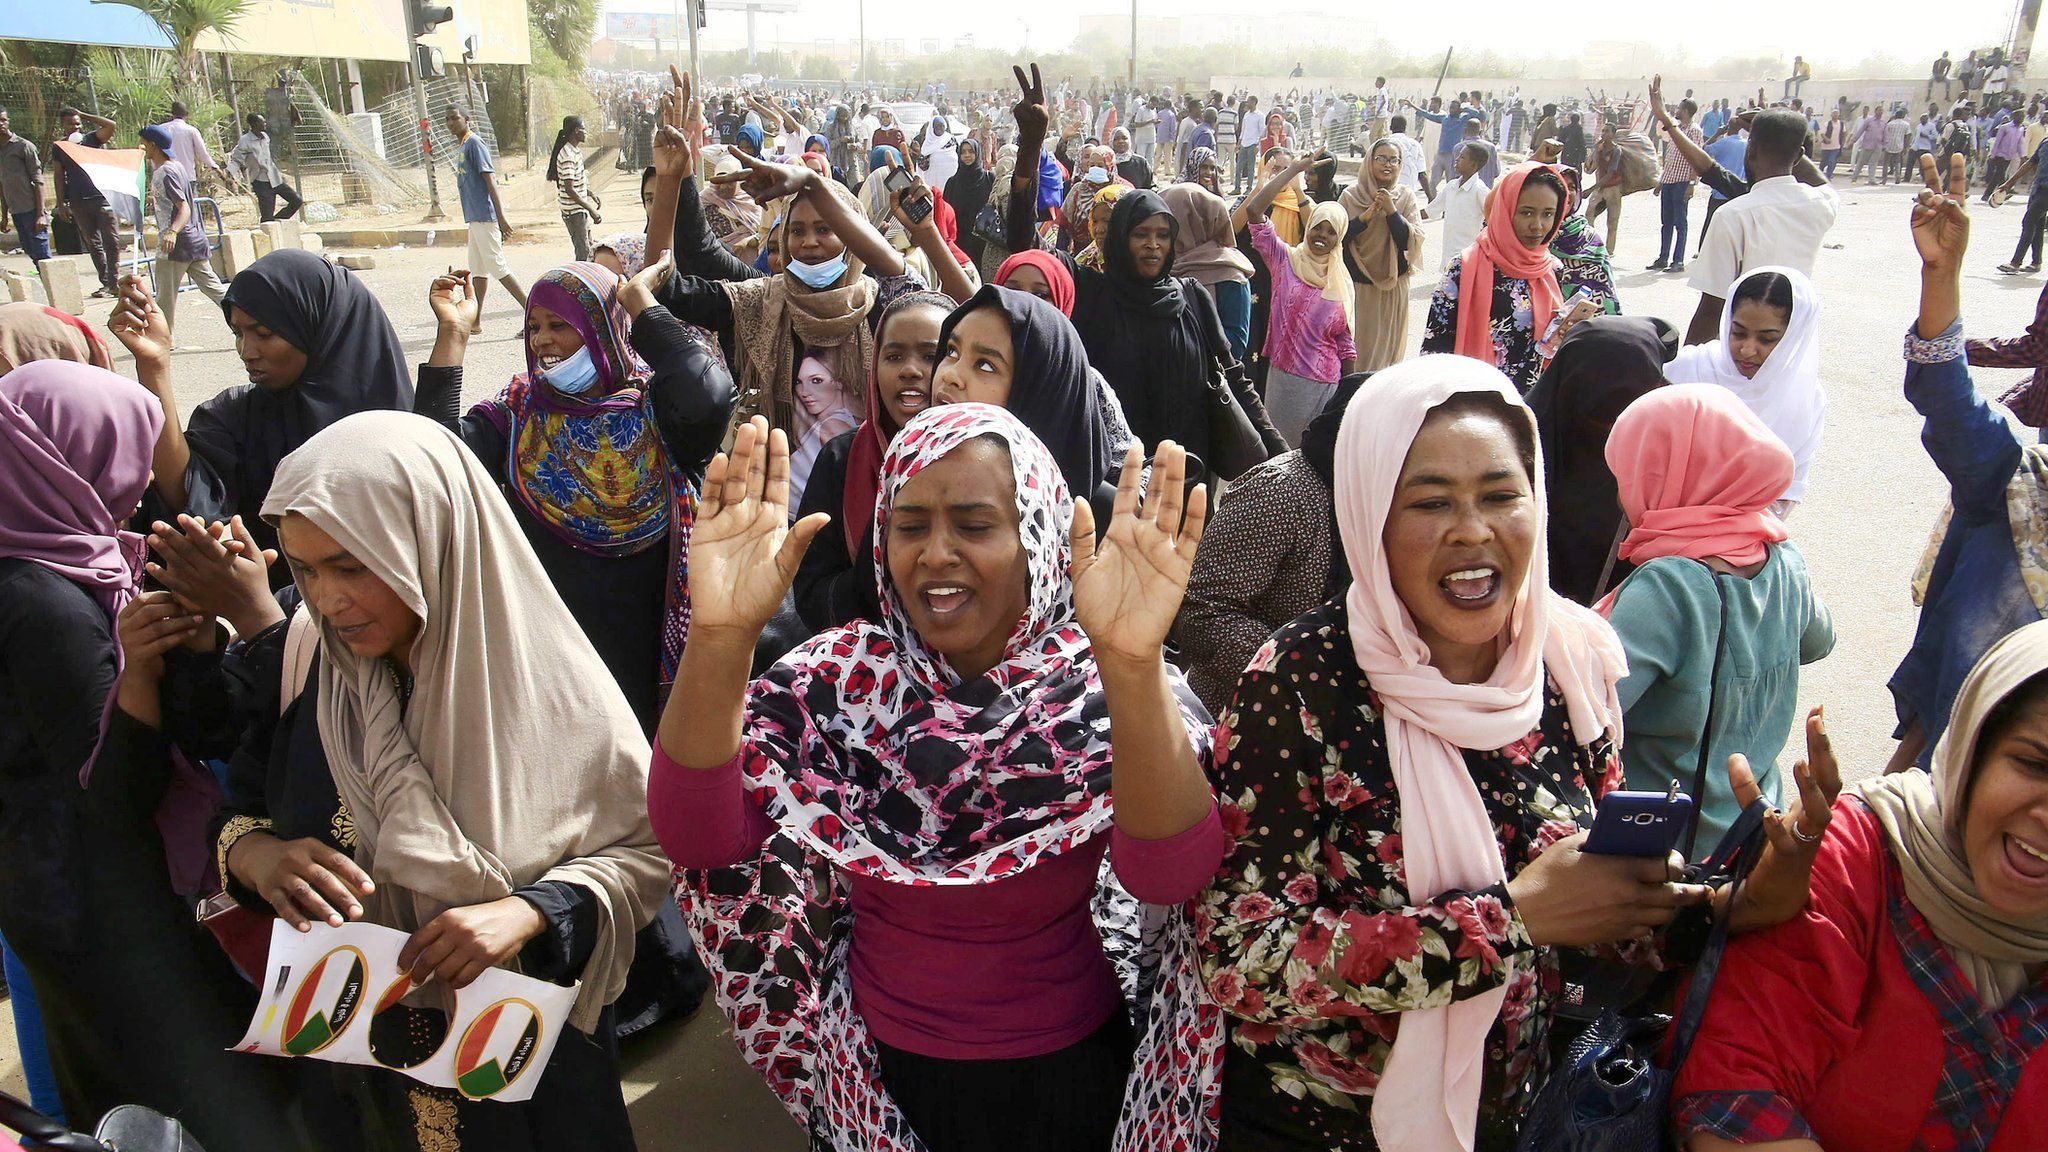 Sudanese people celebrate as they head towards the Army headquarters amid rumors that President Omar al-Bashir has stepped down, in Khartoum, Sudan, 11 April 2019